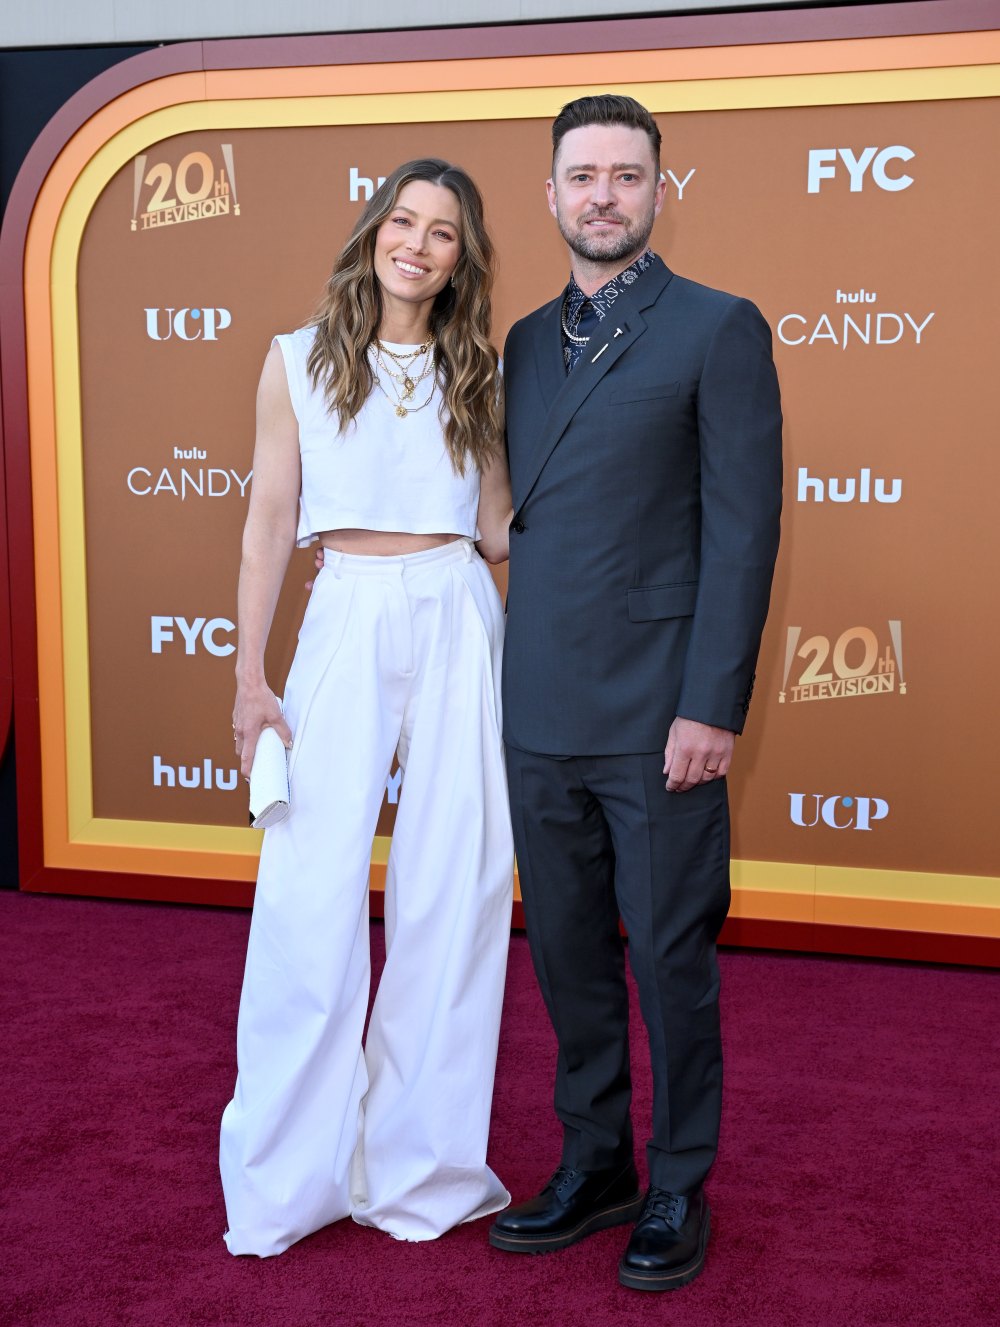 Los Angeles Premiere FYC Event For Hulu's "Candy" - Arrivals, Jessica Biel and Justin Timberlake